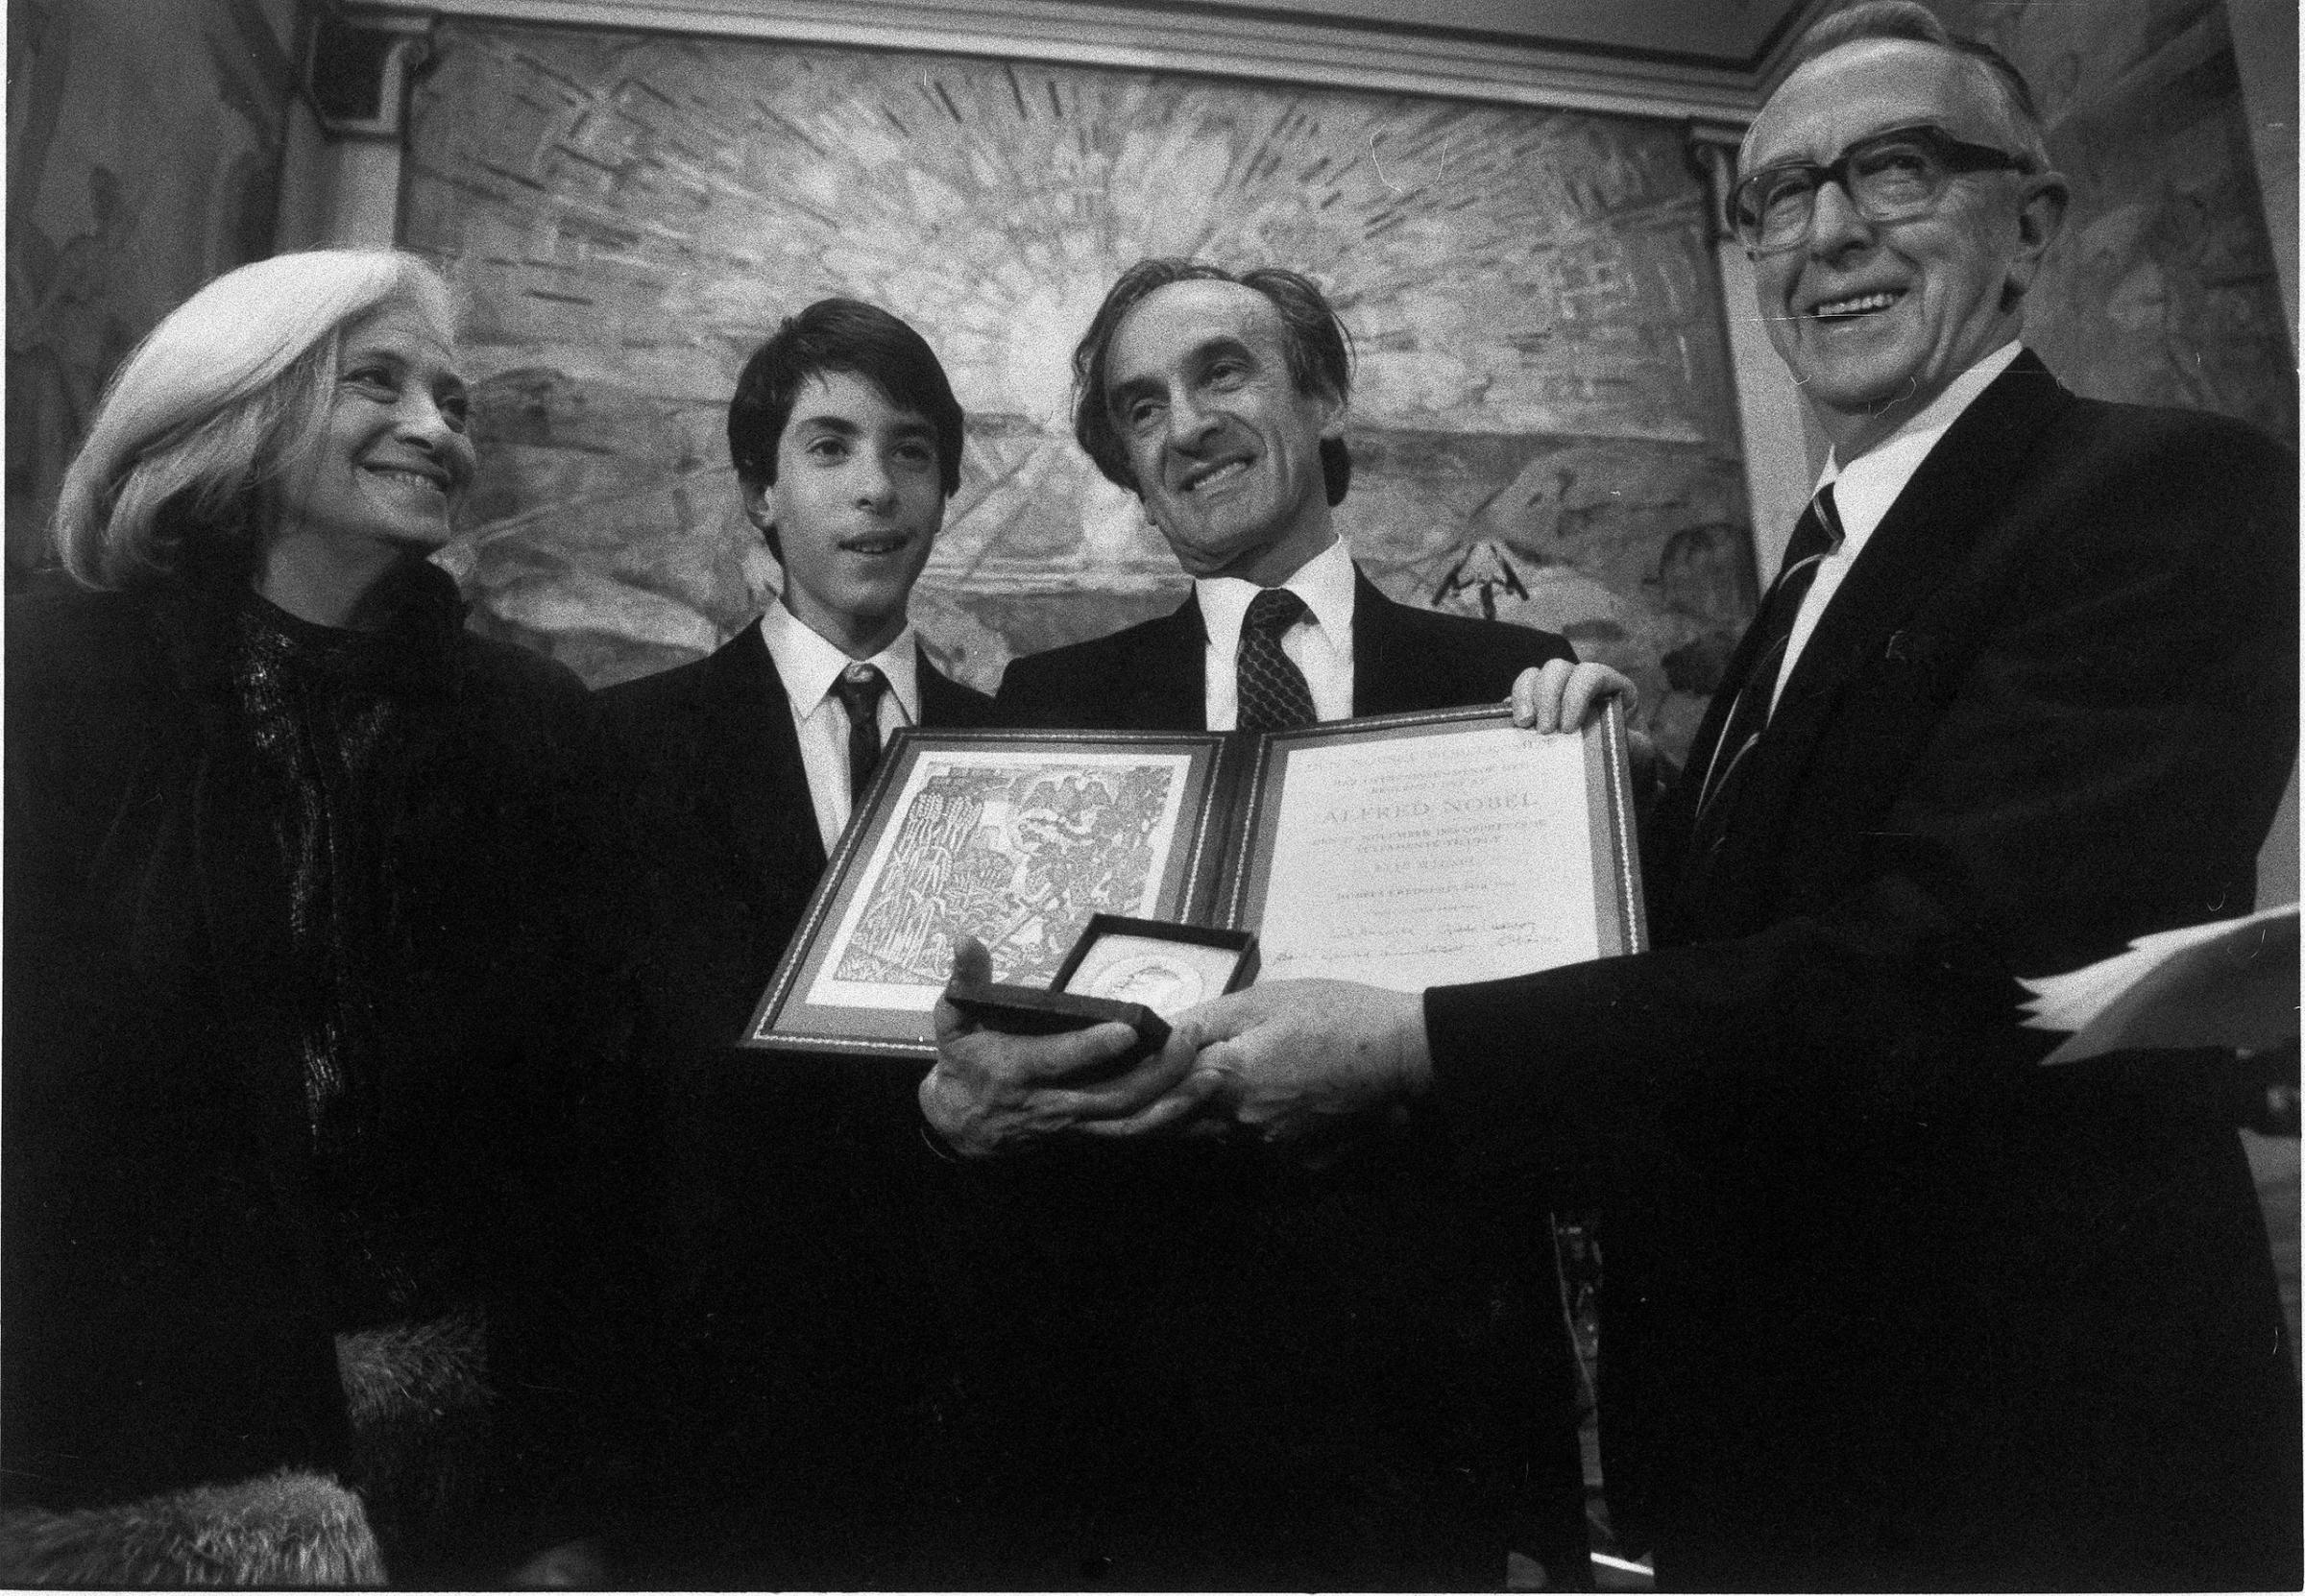 Chairman of the Nobel Peace Prize Committee Egil Aarvik, right, with Peace Prize winner Elie Wiesel, his wife Marion and son Elisha after Wiesel received the award on Dec. 10, 1986.